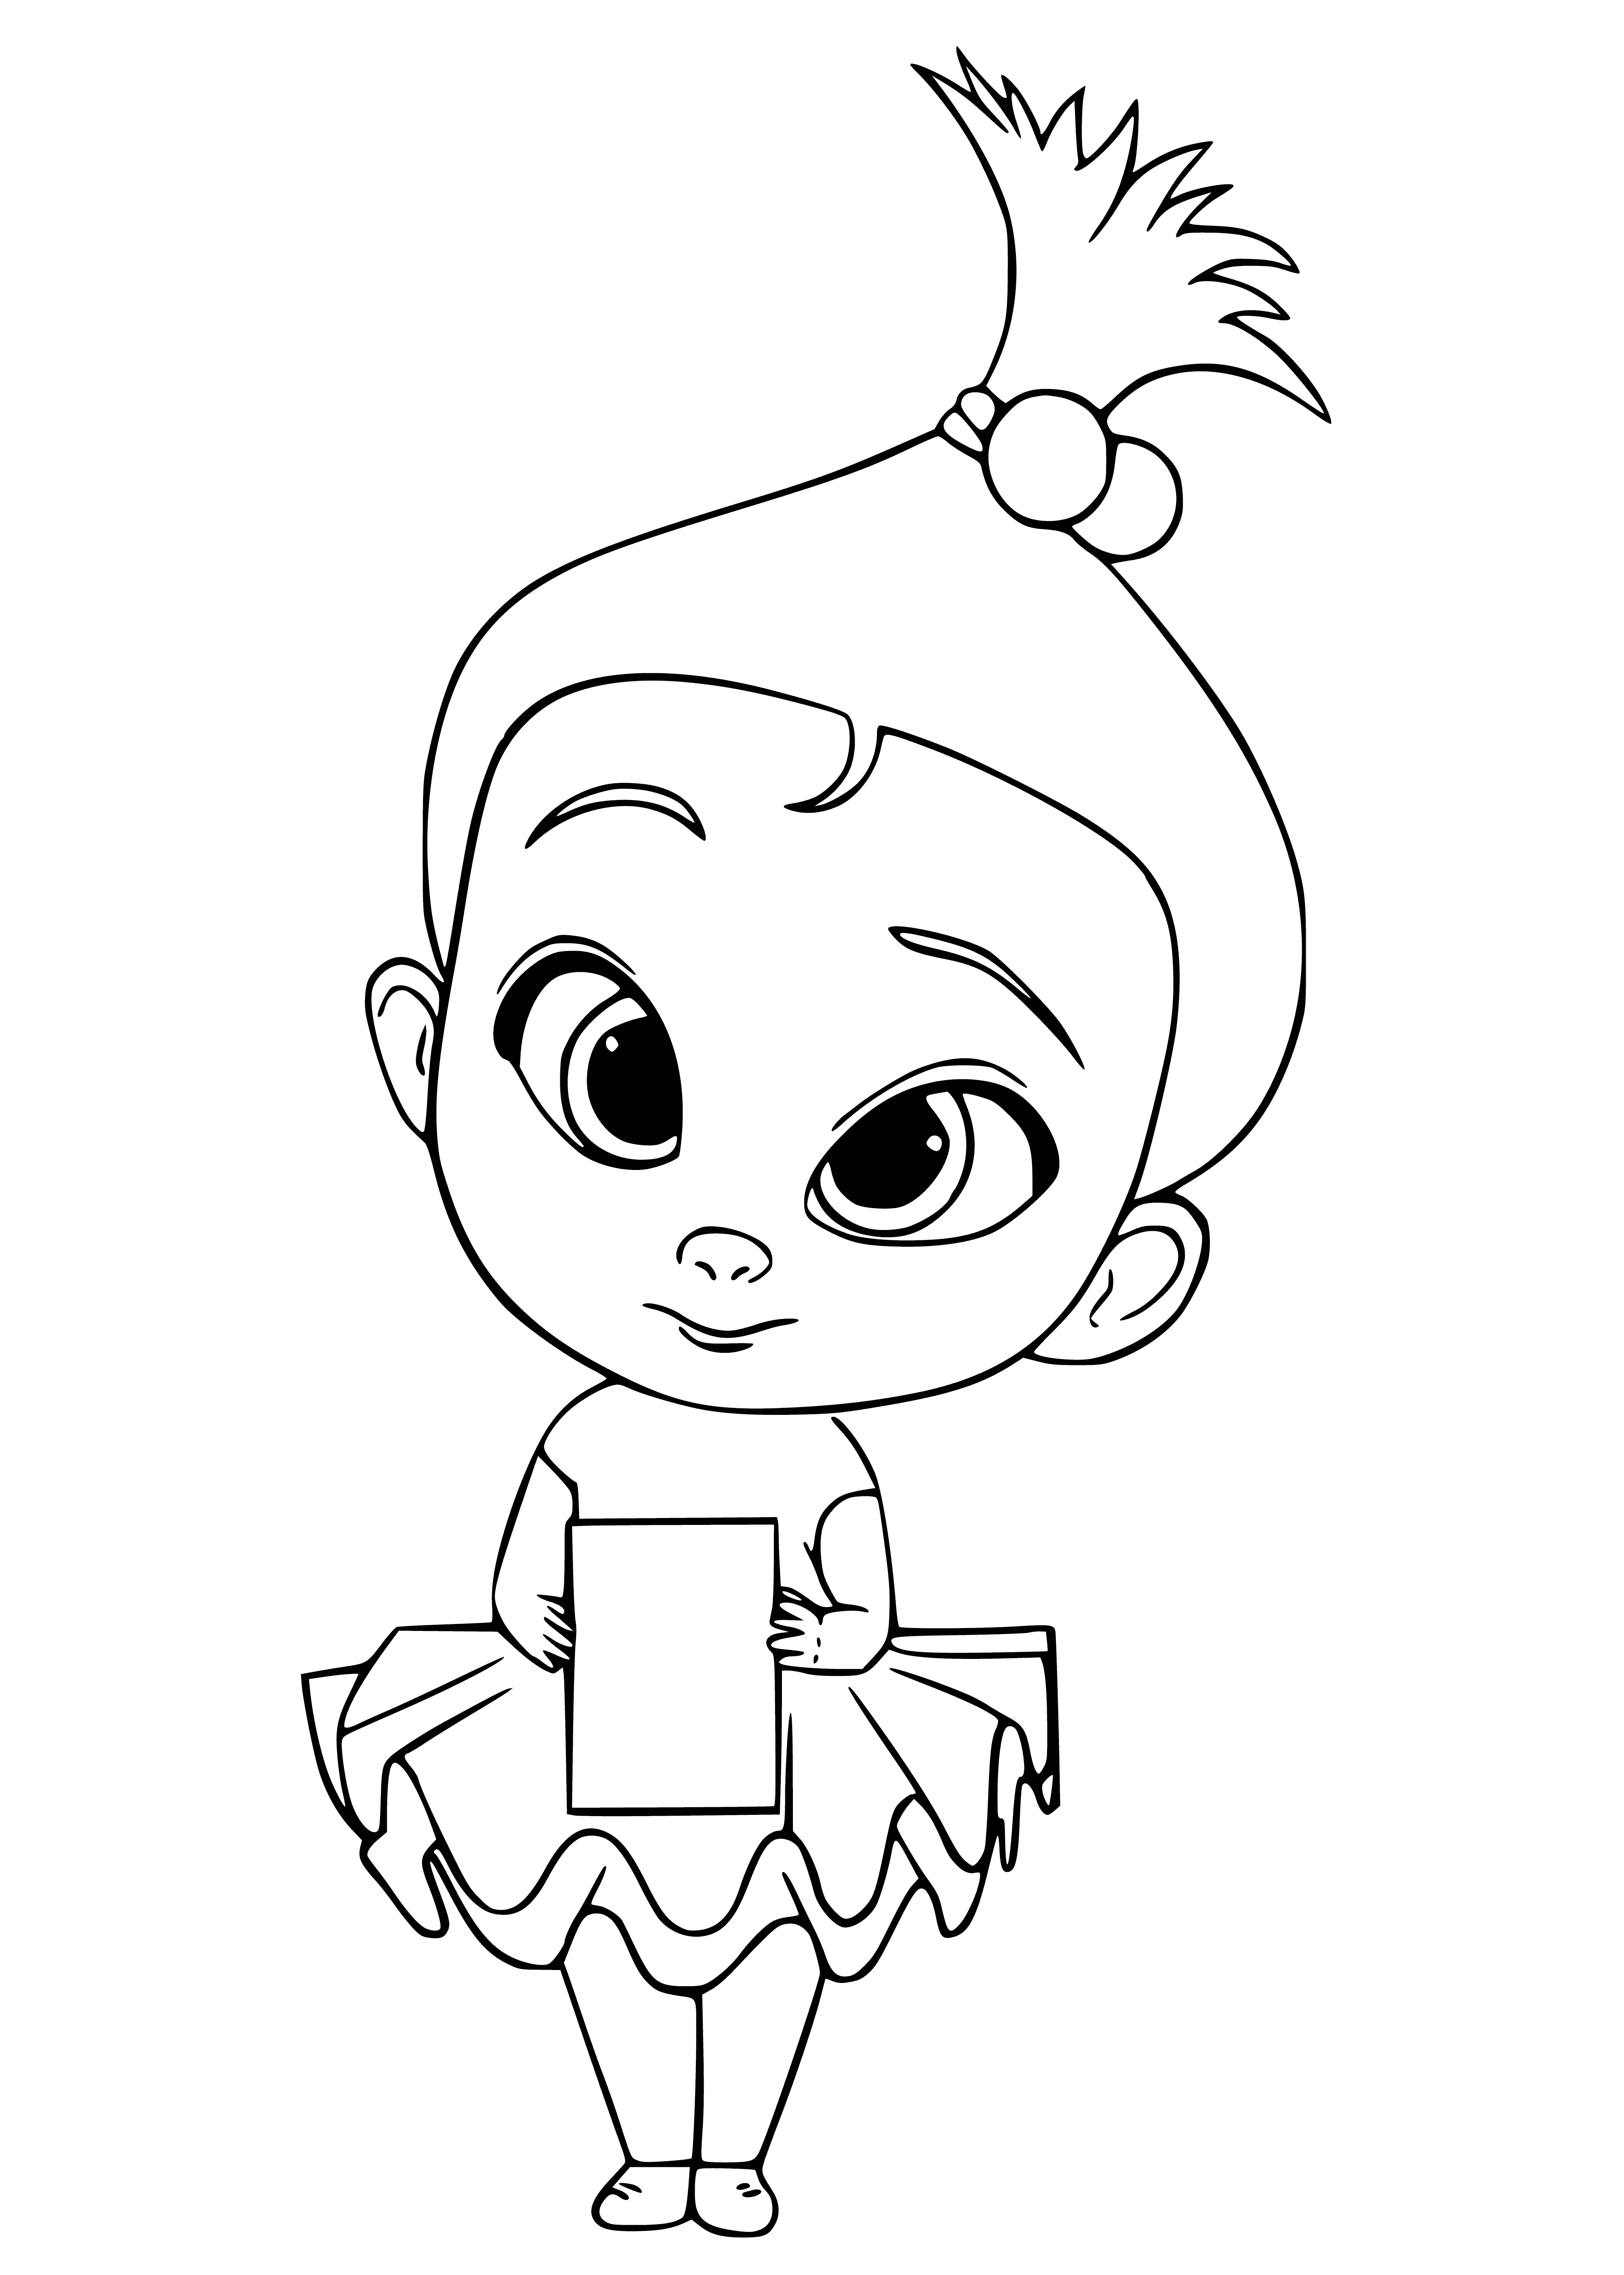 coloring page: Baby sits in front of pink chair wearing blue suit, white shirt, black tie, plus briefcase and mic.